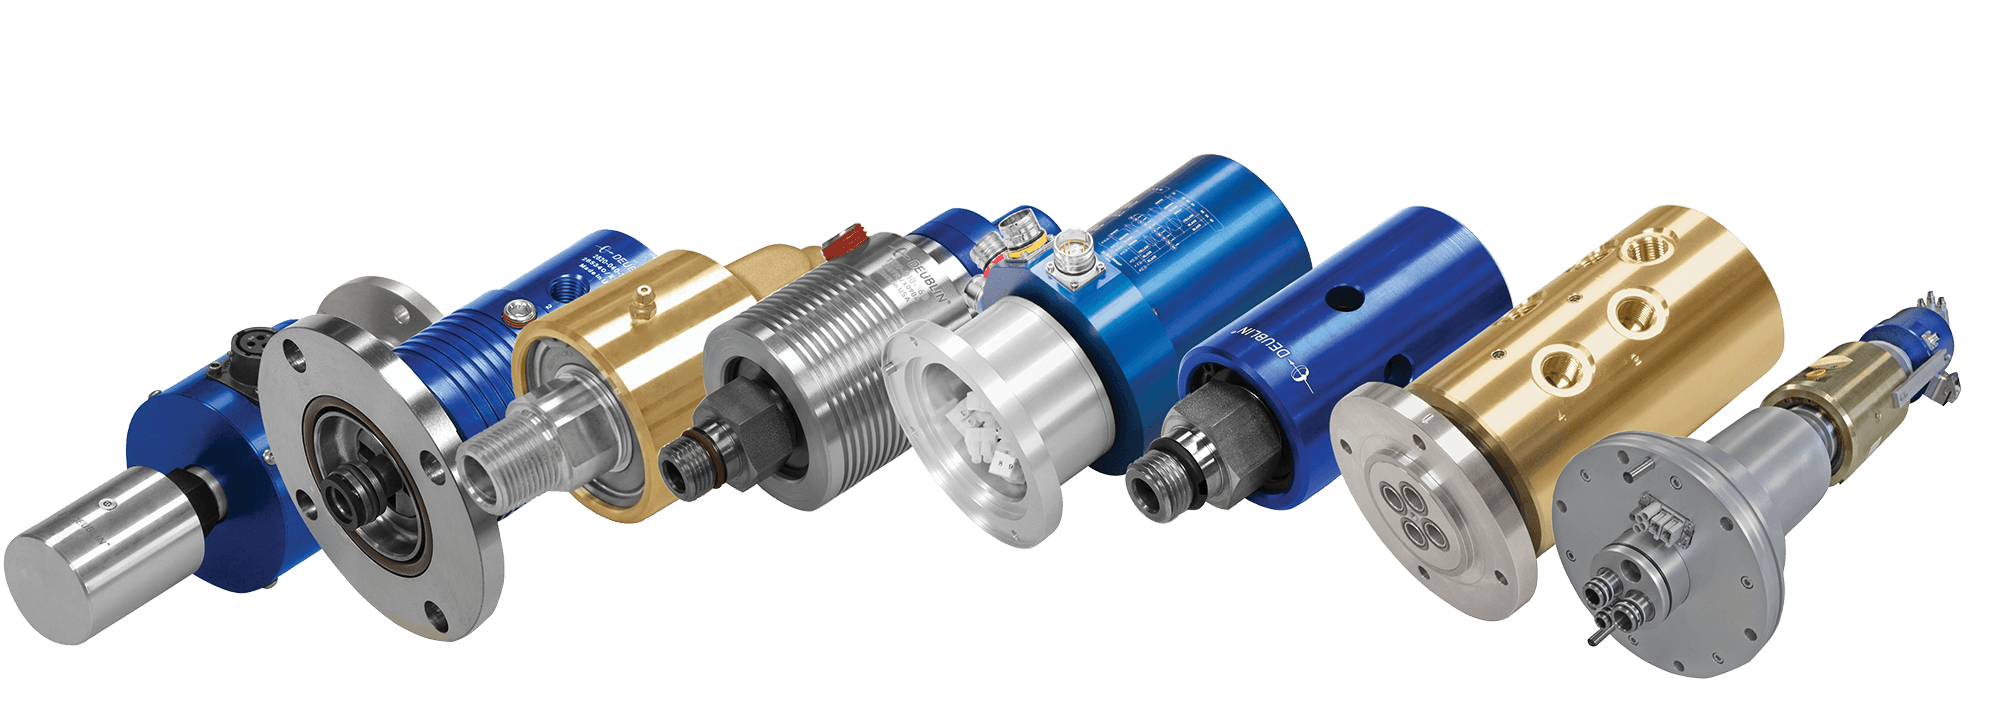 World-Class Rotary Unions and Electrical Slip Rings